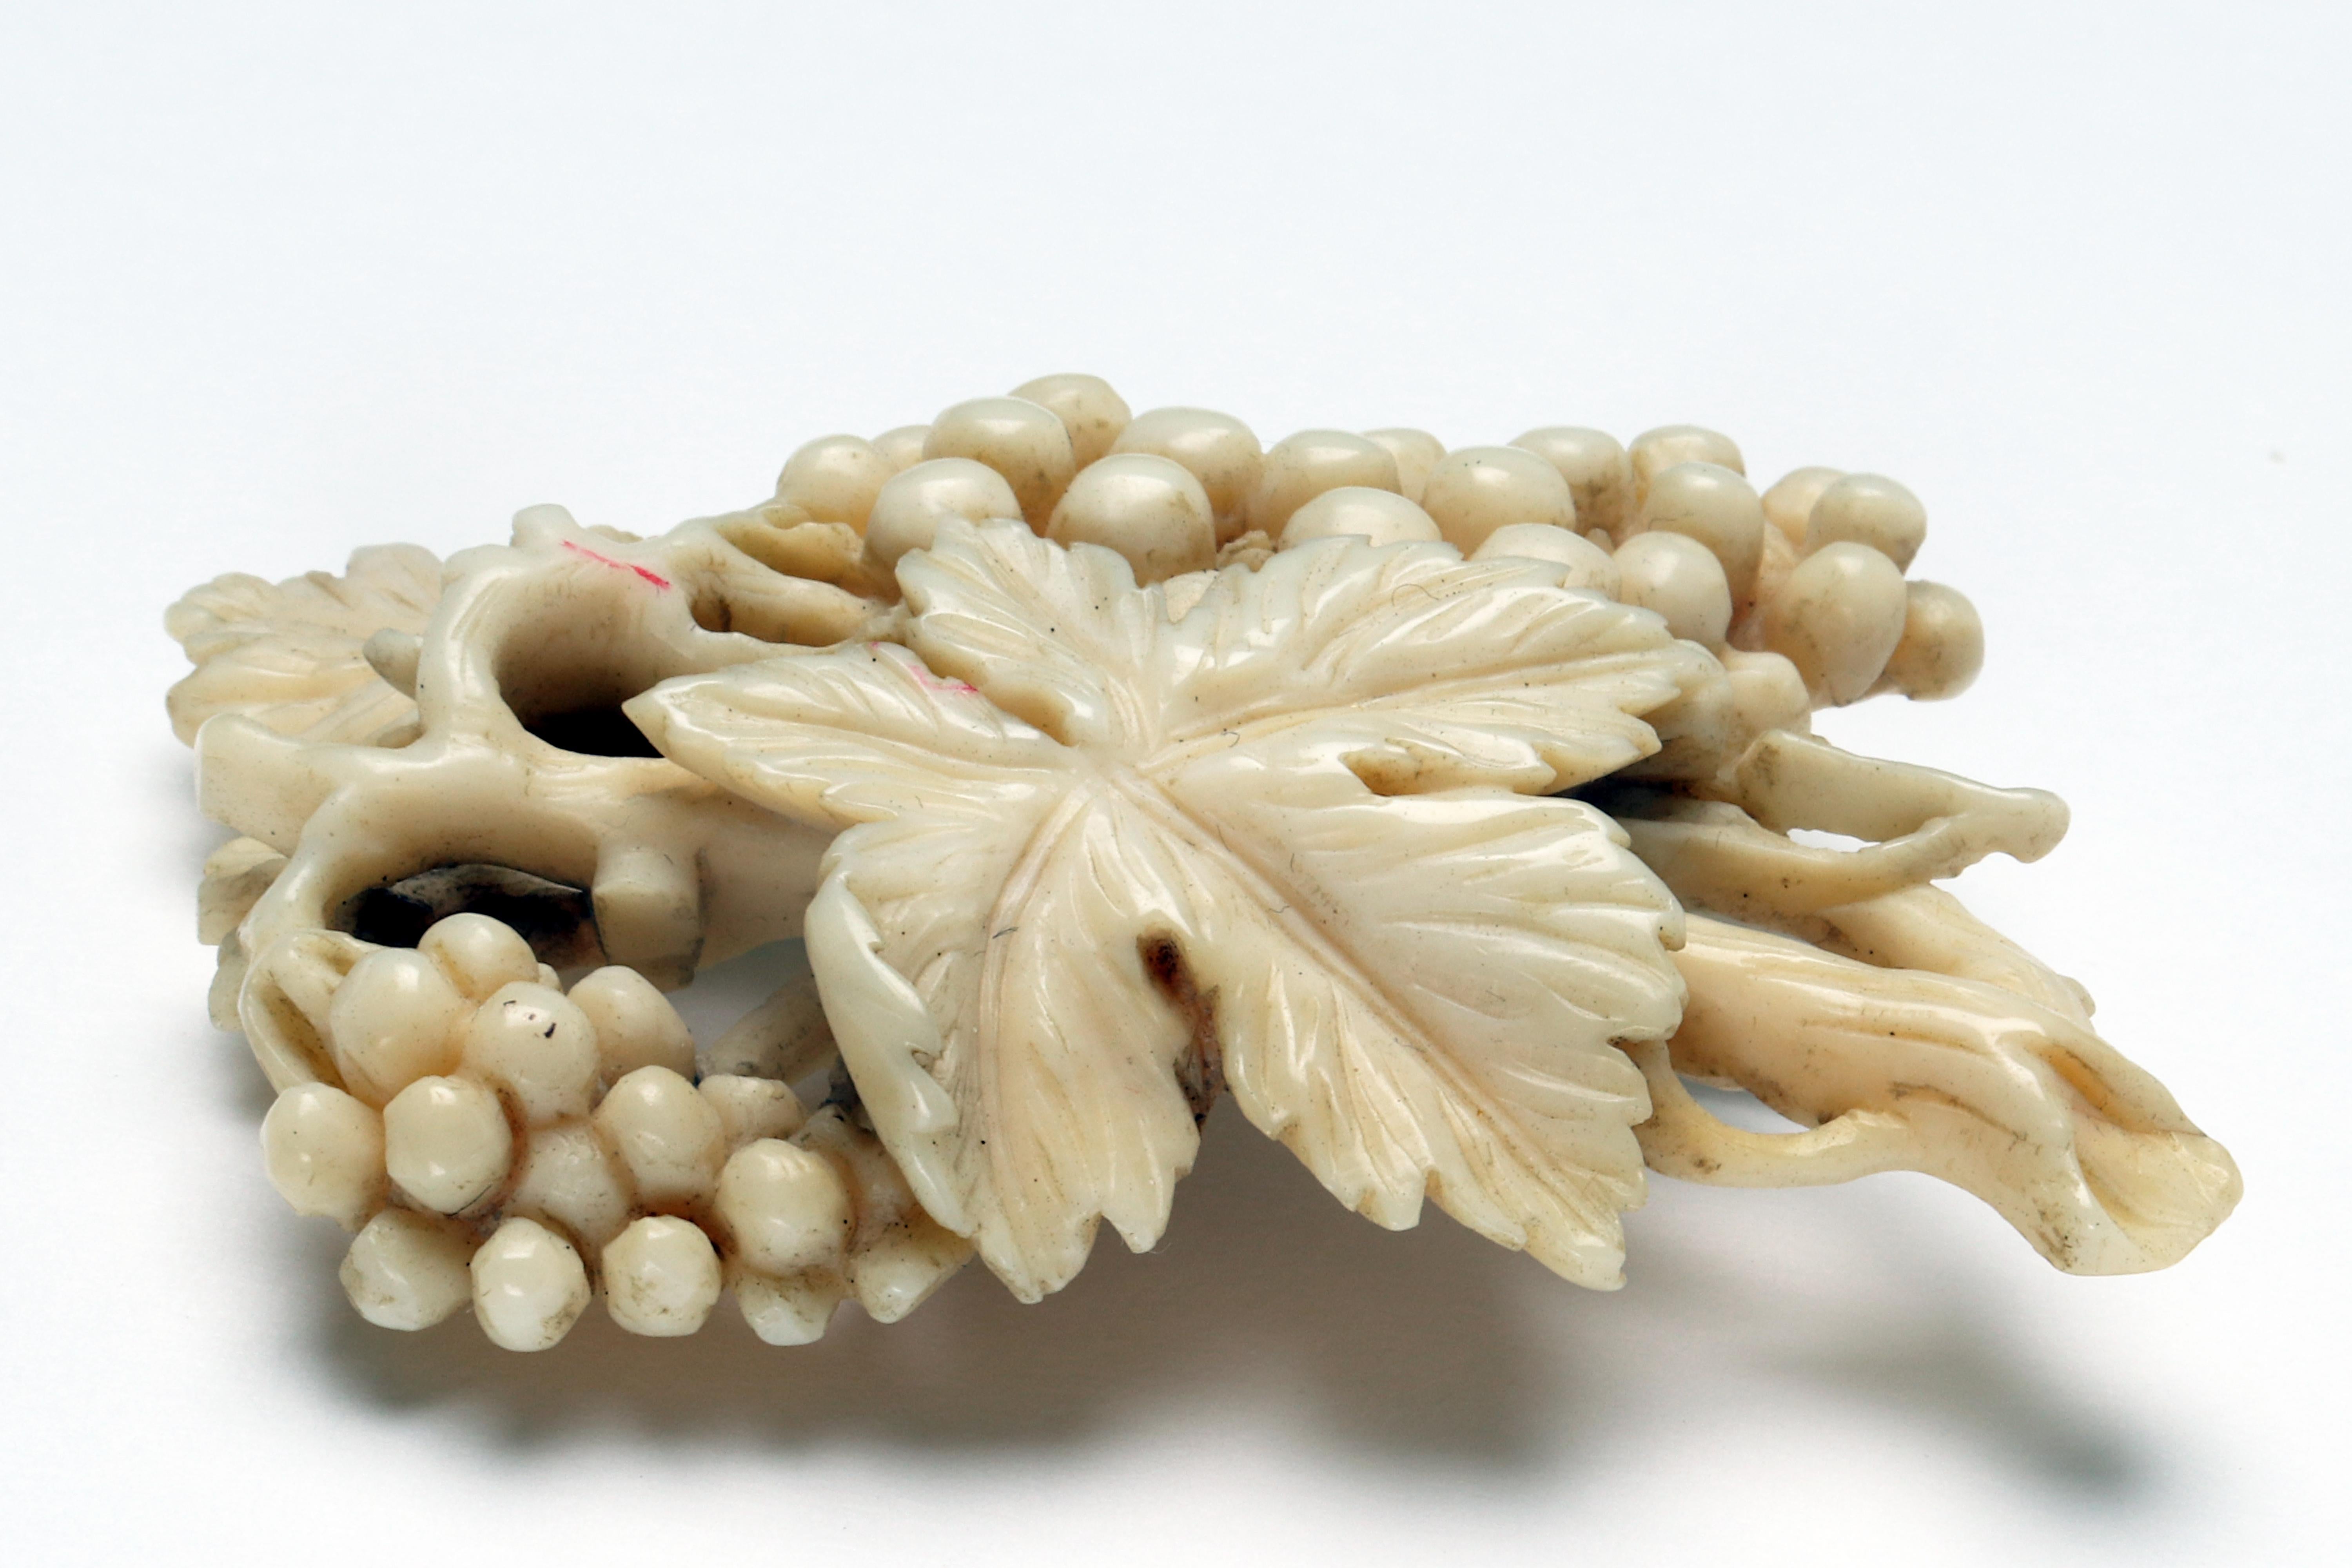 19th Century A brooch made of ivory depicting bunches of grapes, England 1890. For Sale